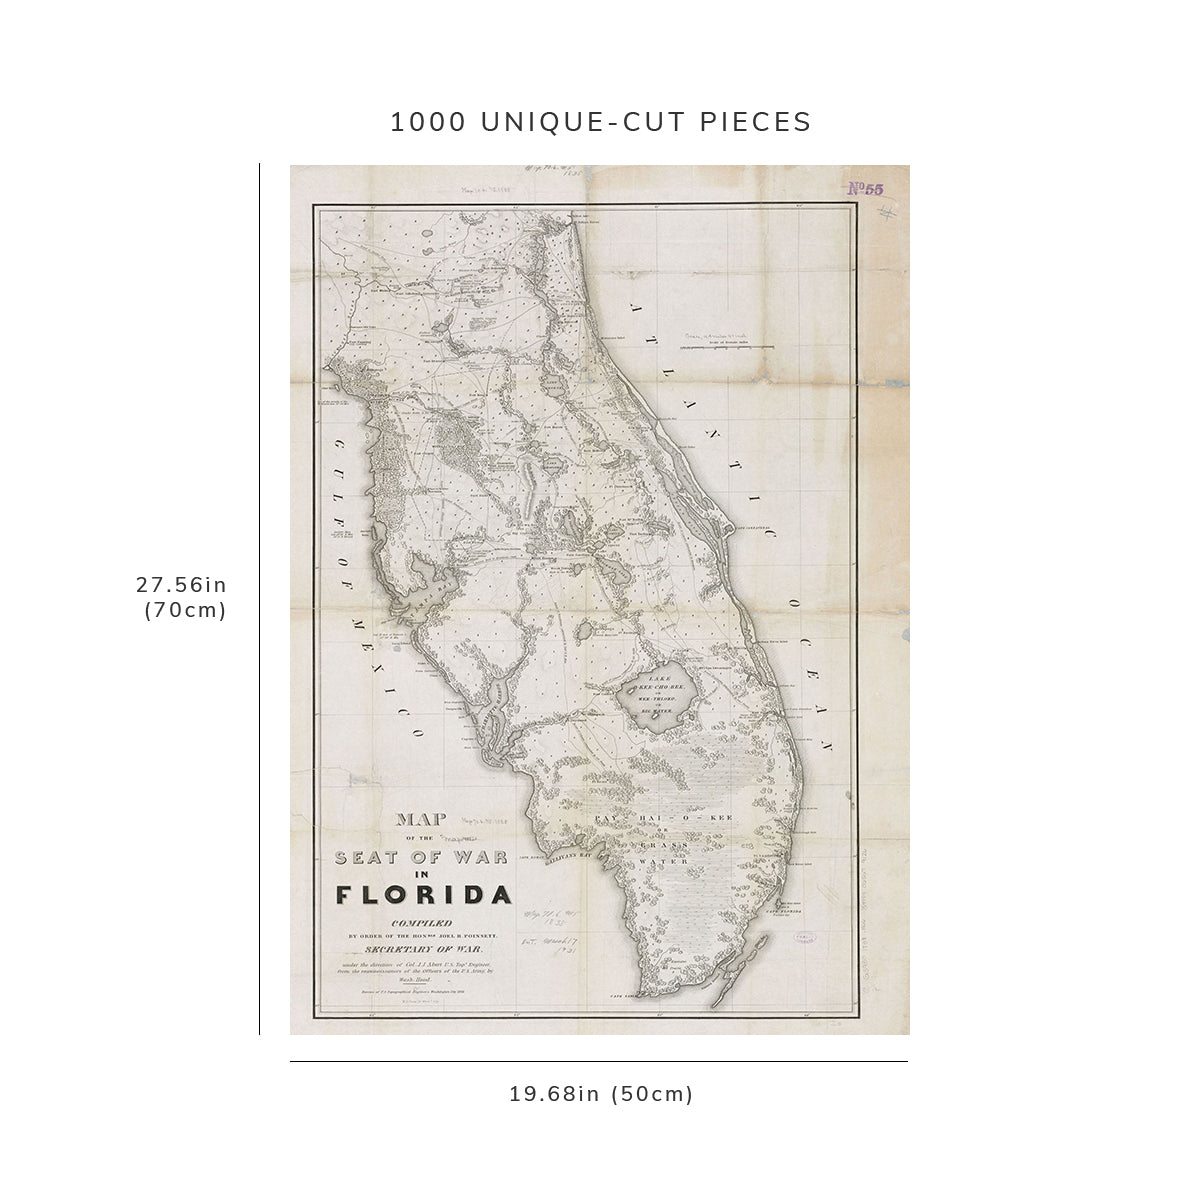 1000 Piece Jigsaw Puzzle: 1838 Map Florida of the seat of war in Florida